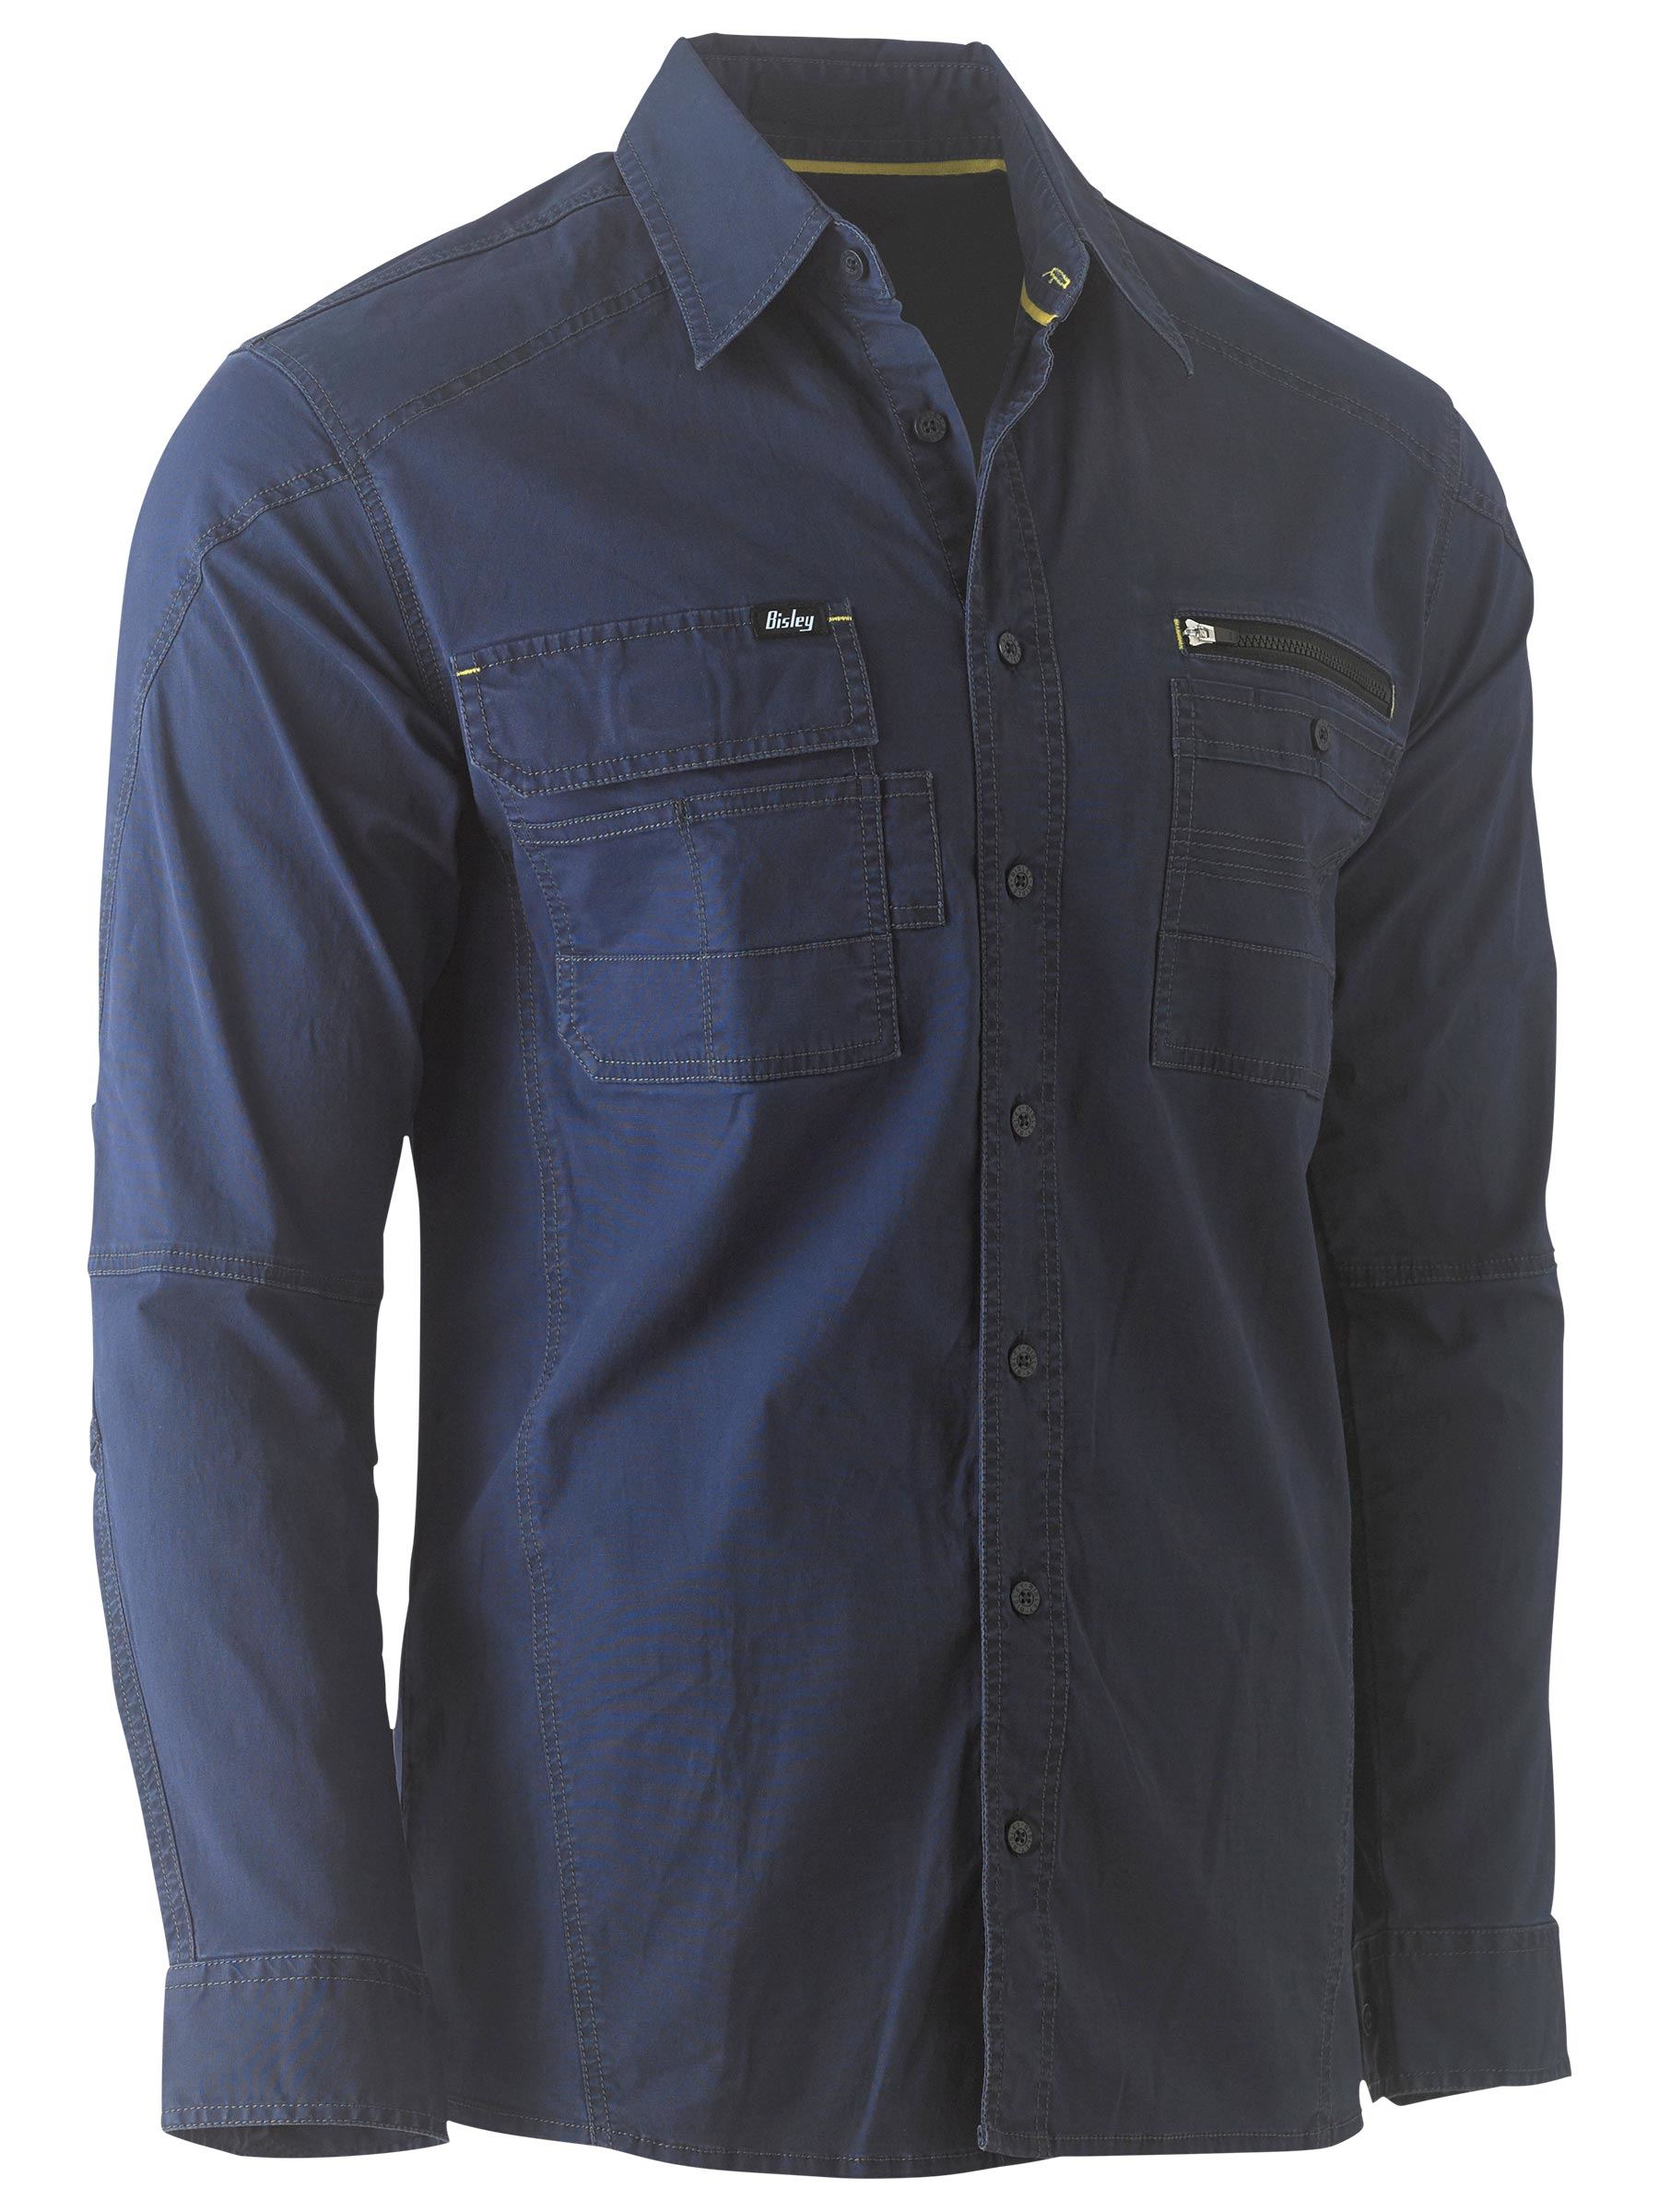 Flx and Move™ Long Sleeve Utility Work Shirt - BS6144 - Bisley Workwear